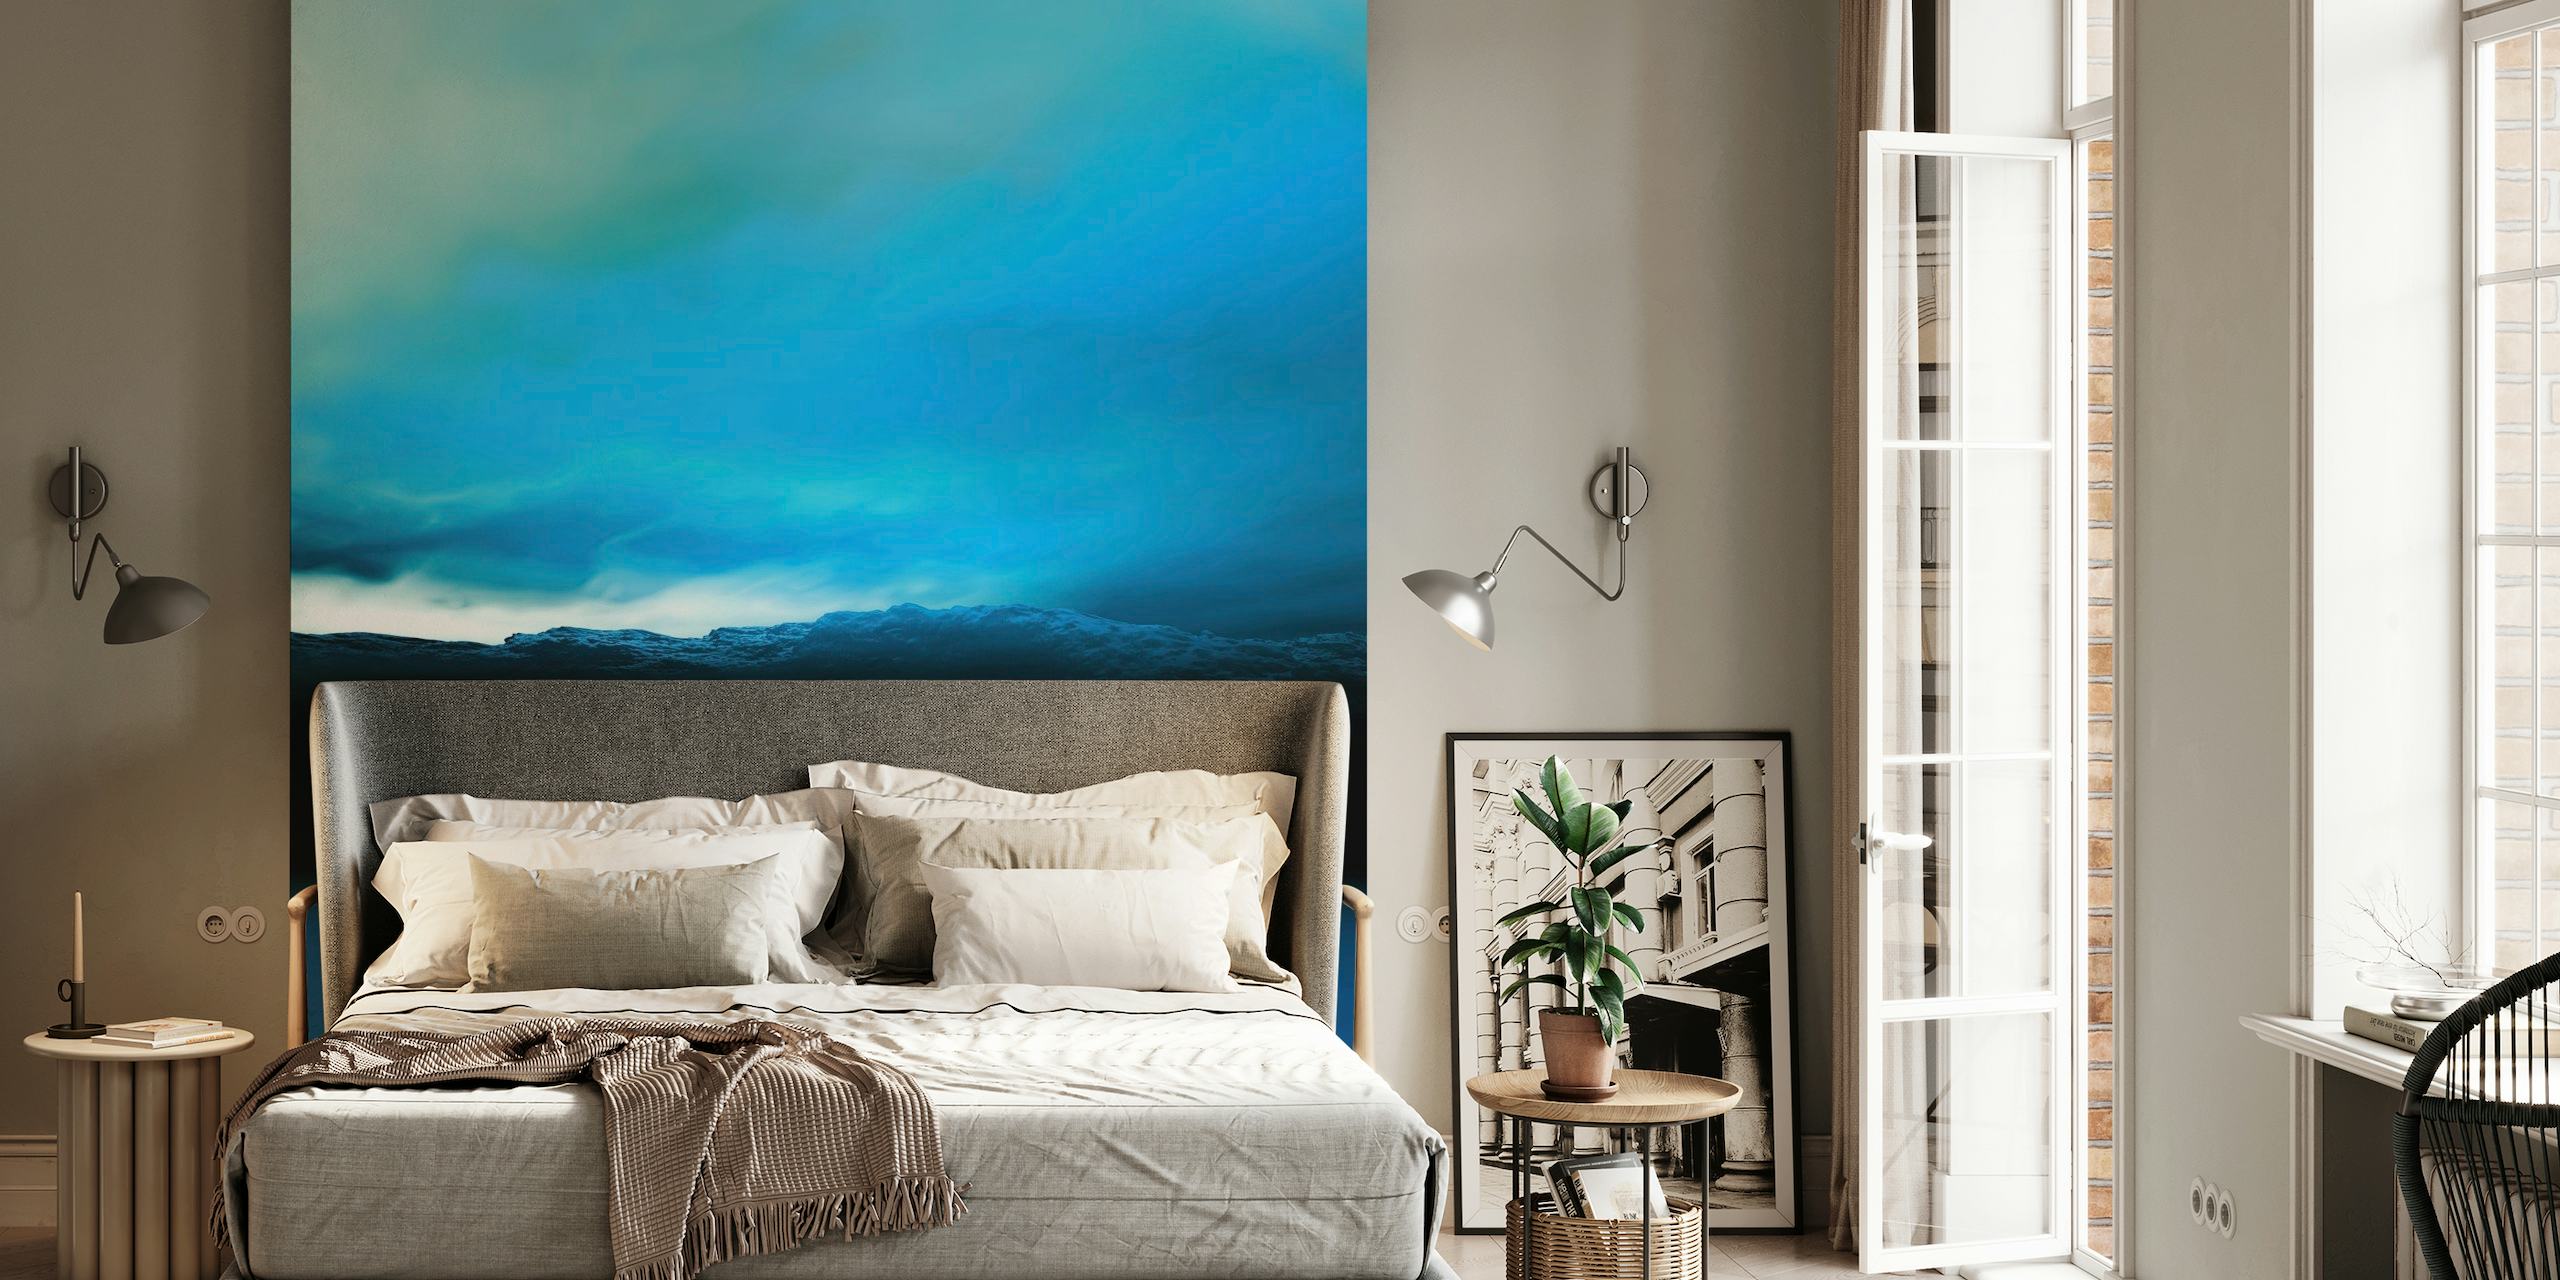 Bluish Sunset wall mural with serene blue tones and dark landscape silhouettes